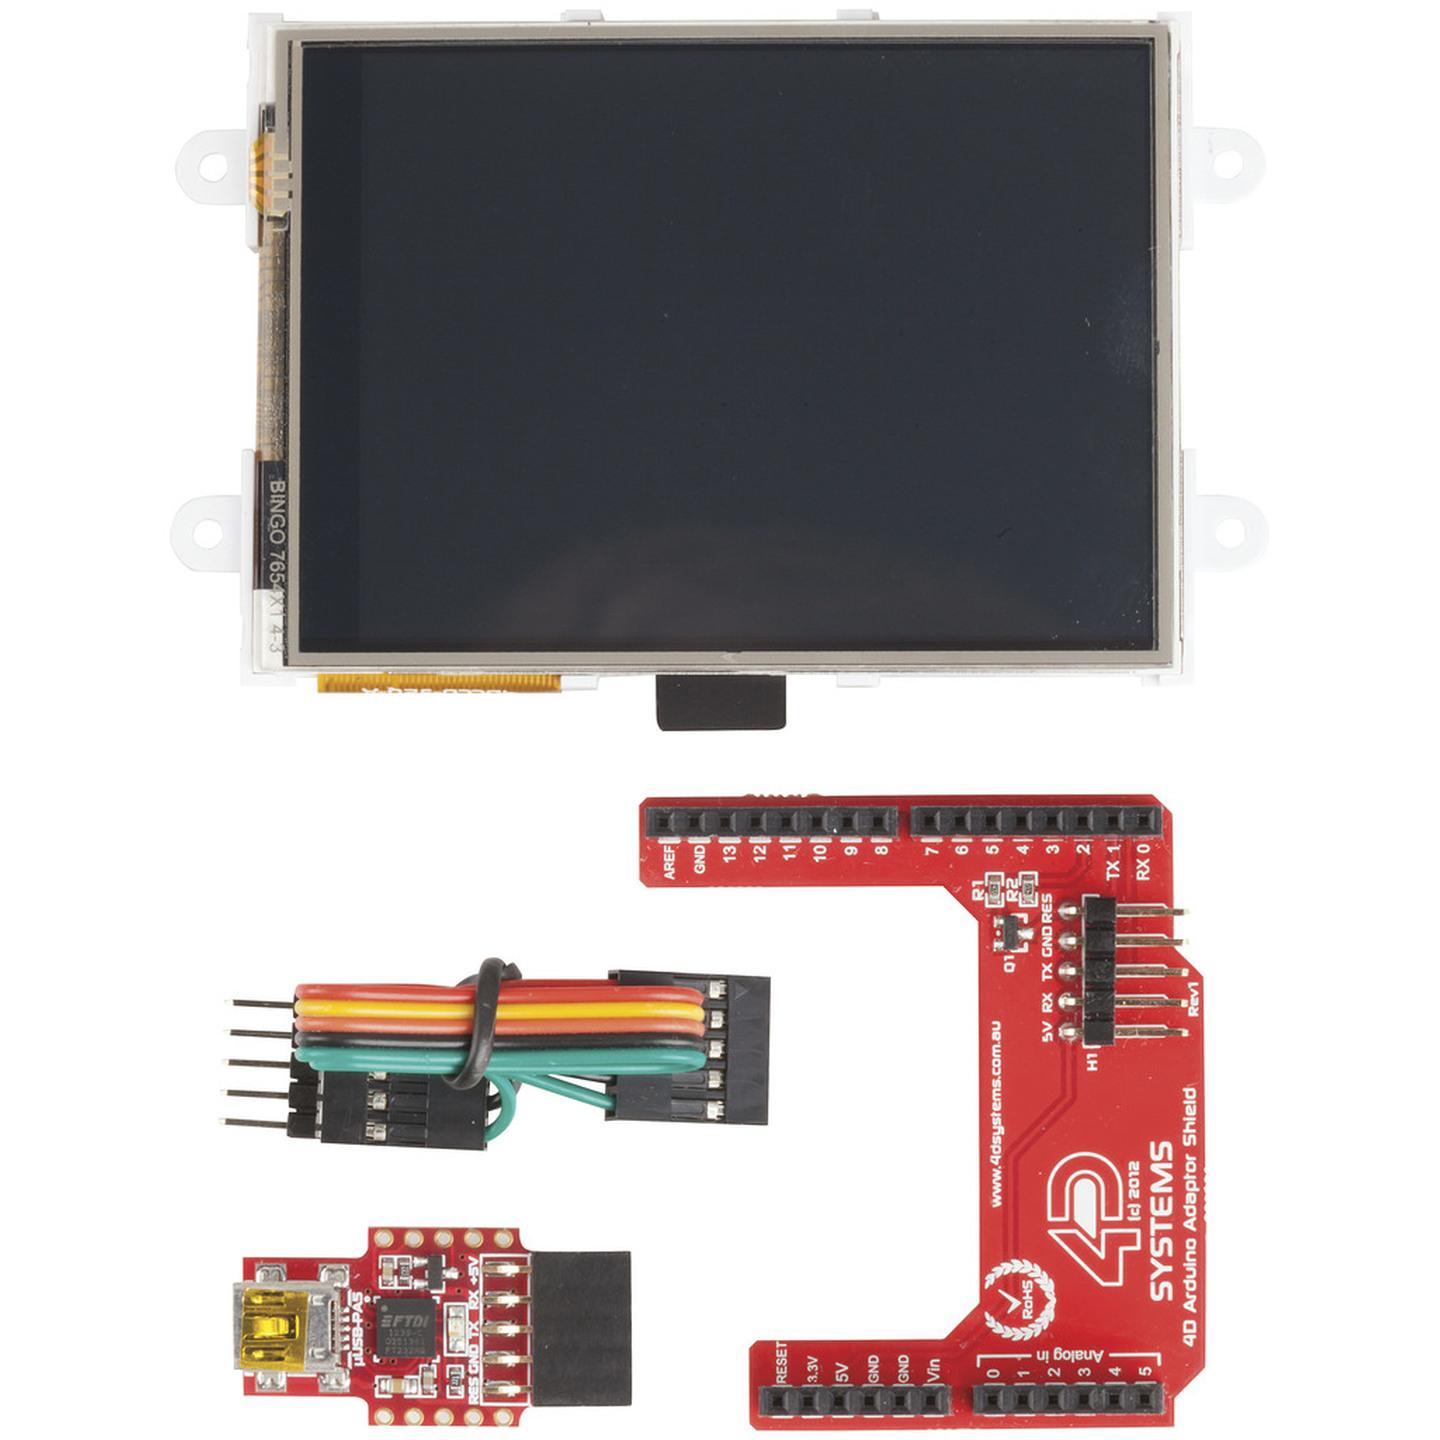 4D Systems Intelligent 3.2in LCD Module with Touch for Arduino